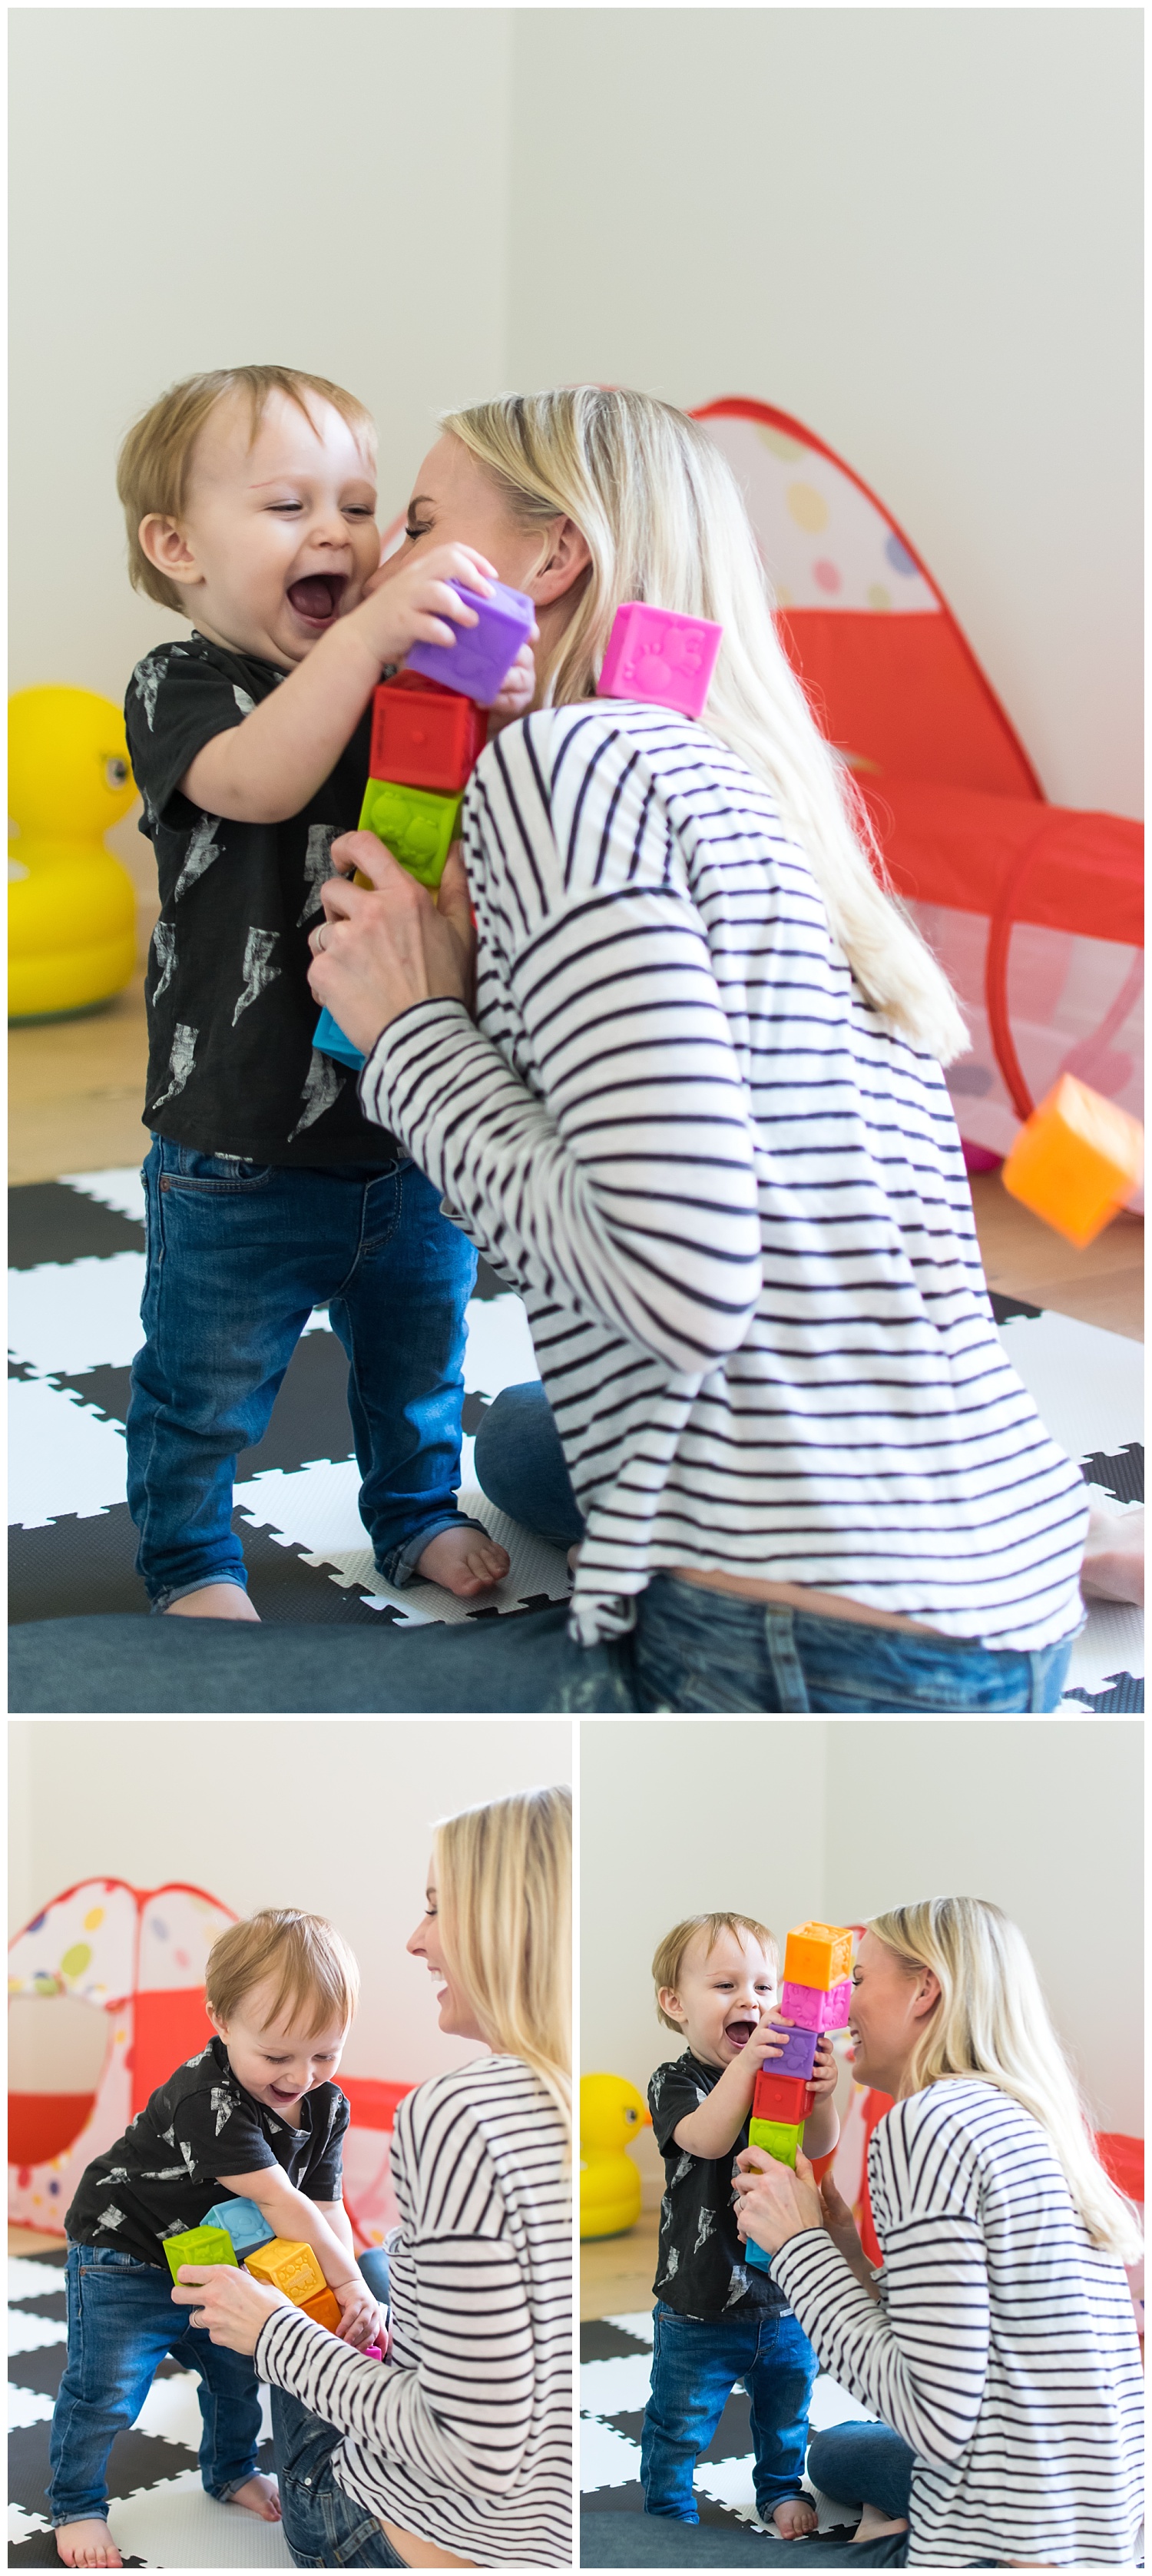 these are images of a mother and a toddler during a mommy and me session playing with blocks in the child's playroom.